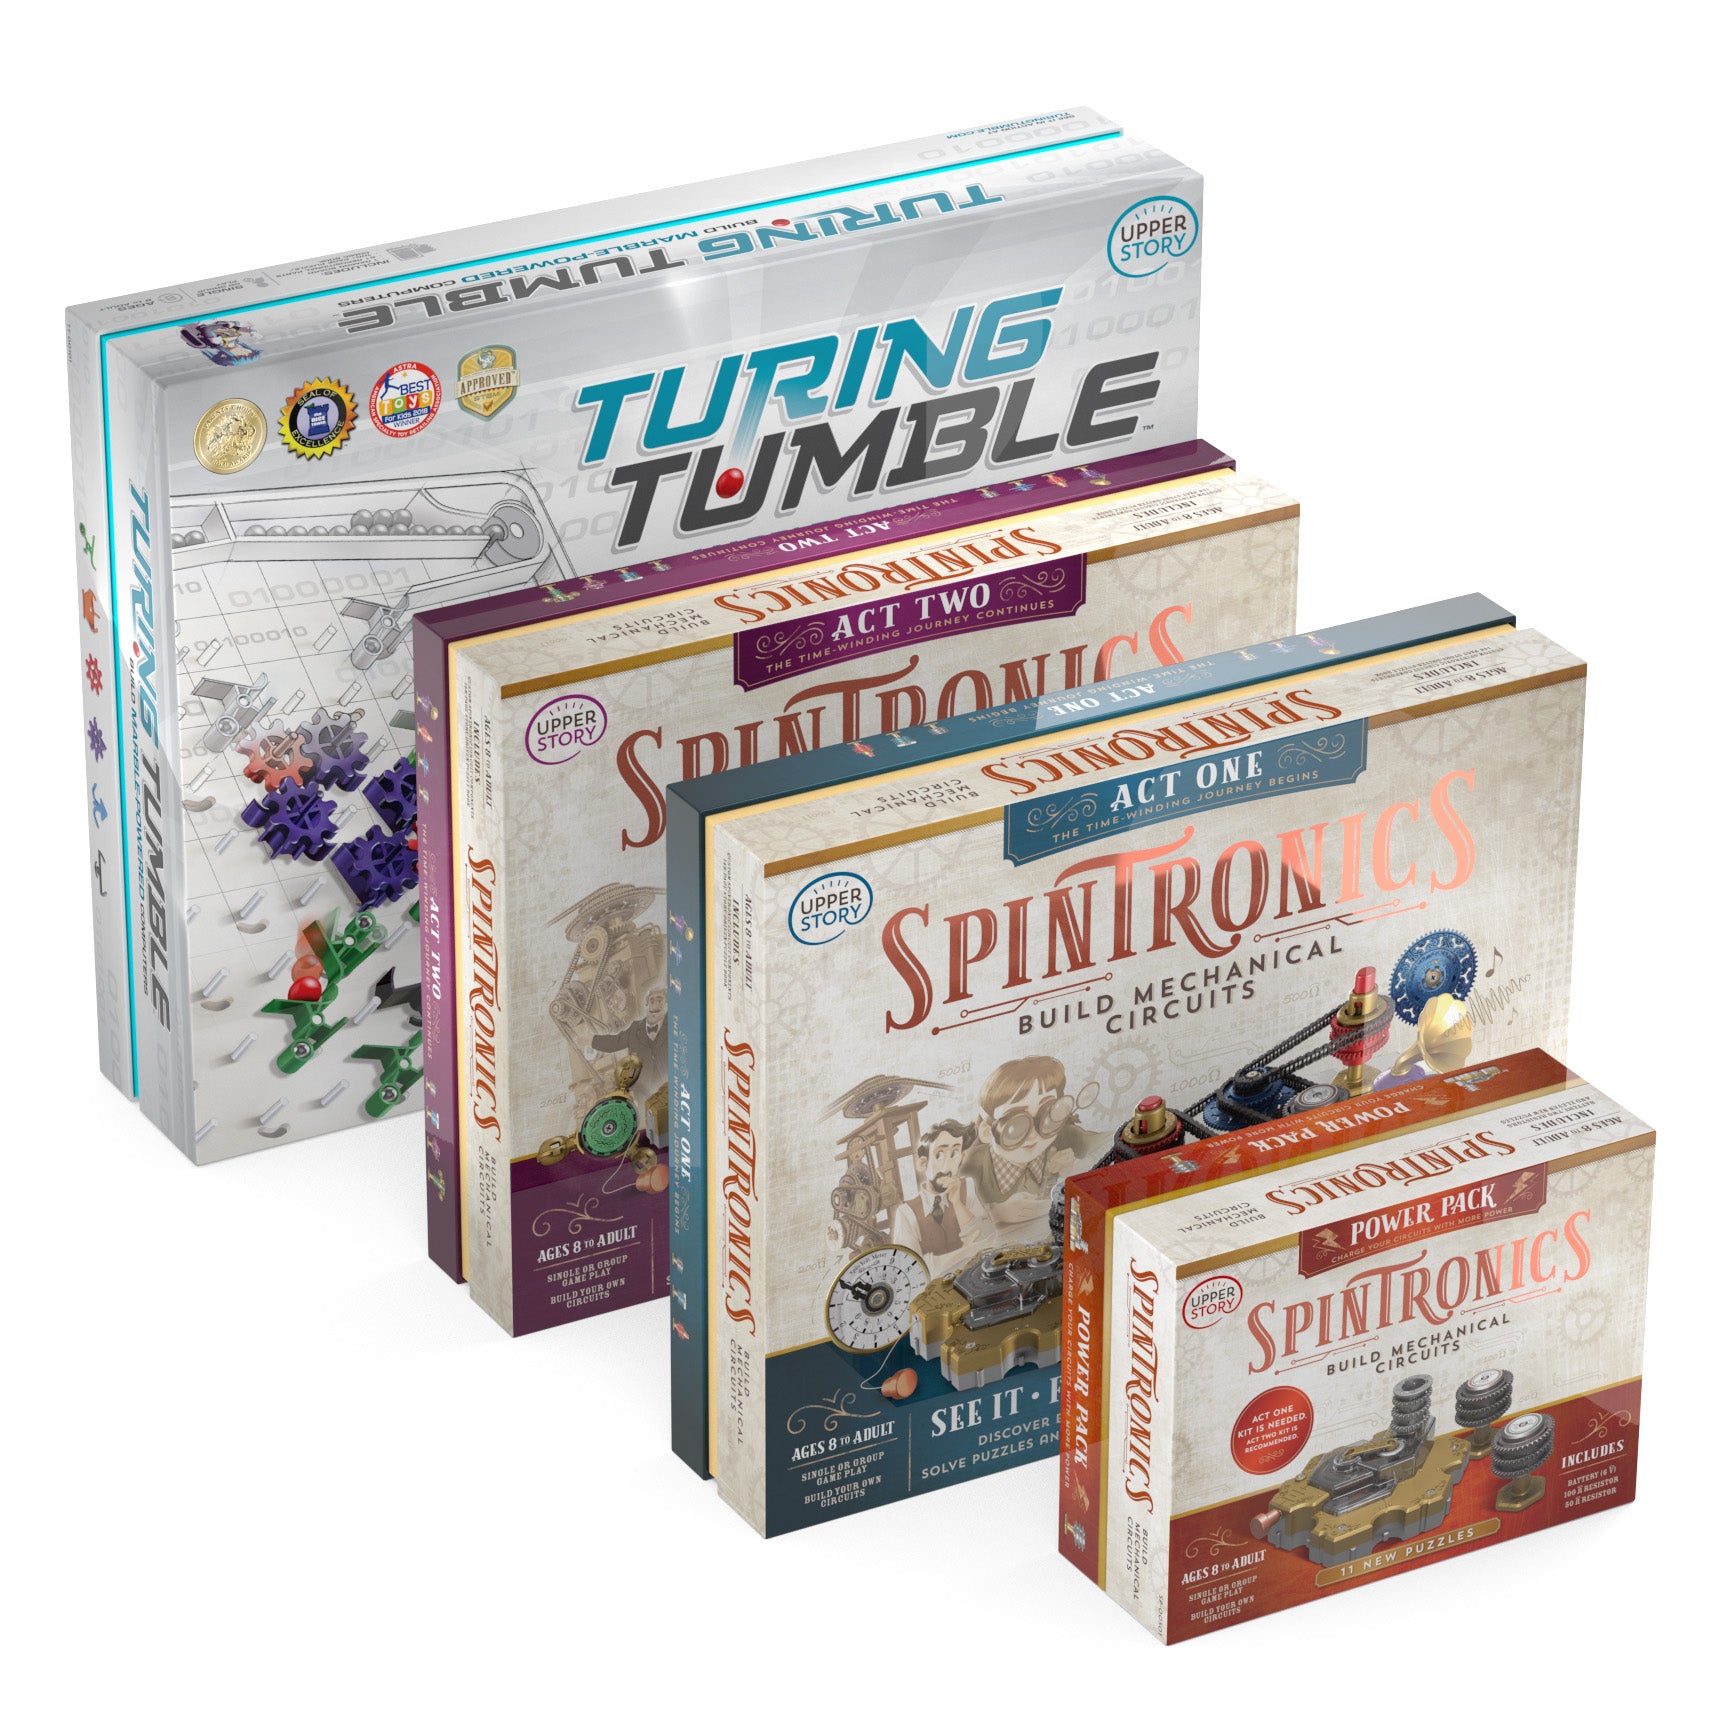 Review: Turing Tumble lets kids build complex marble-powered computers